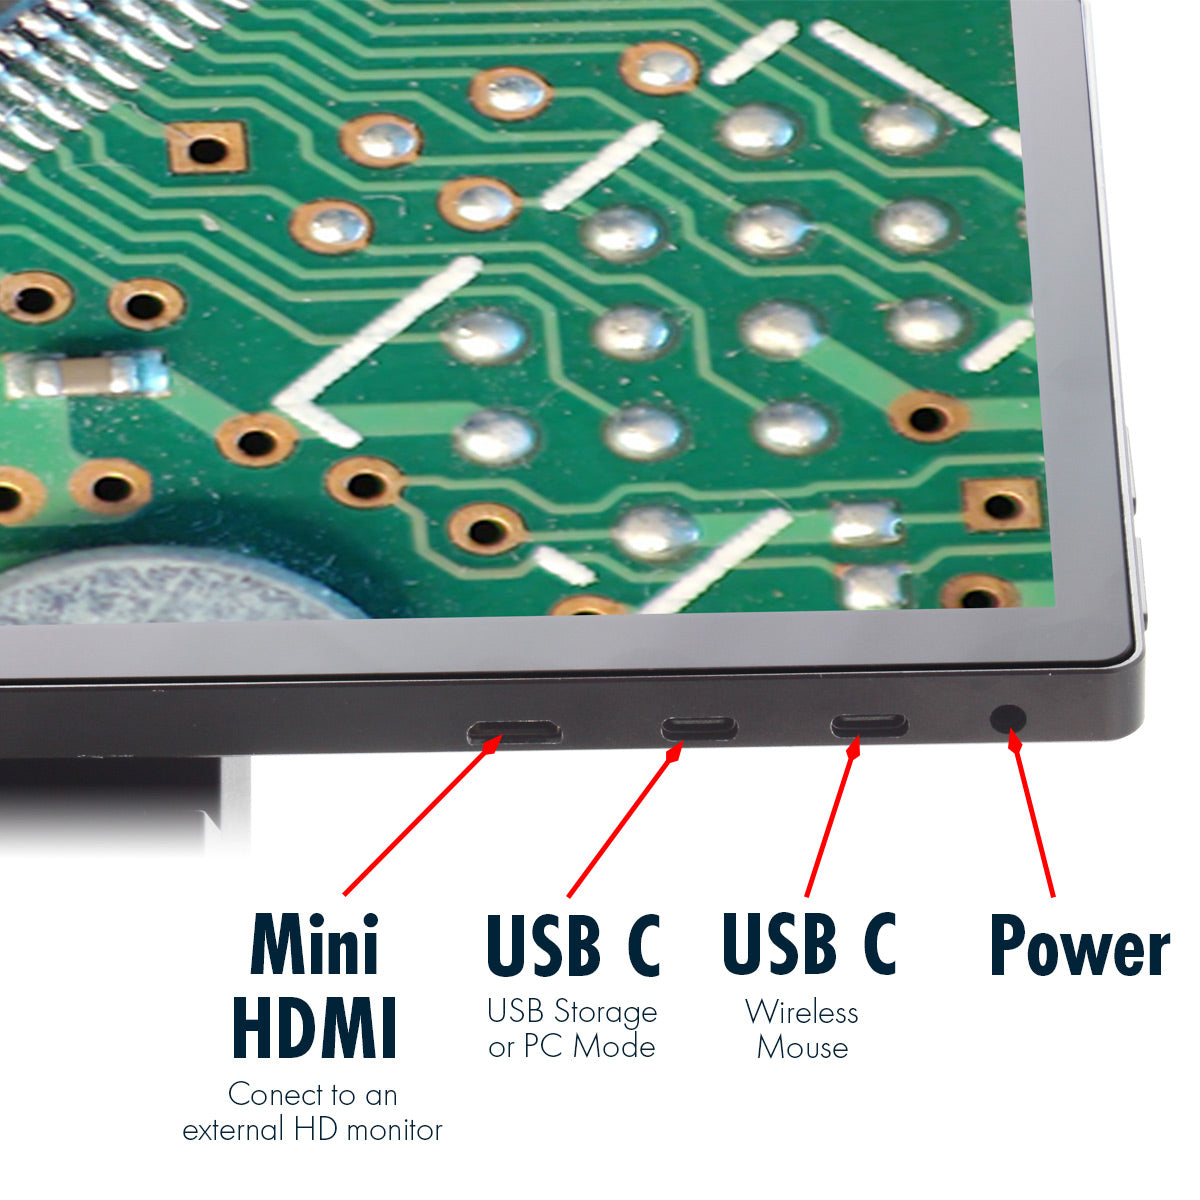 USB and HDMI 